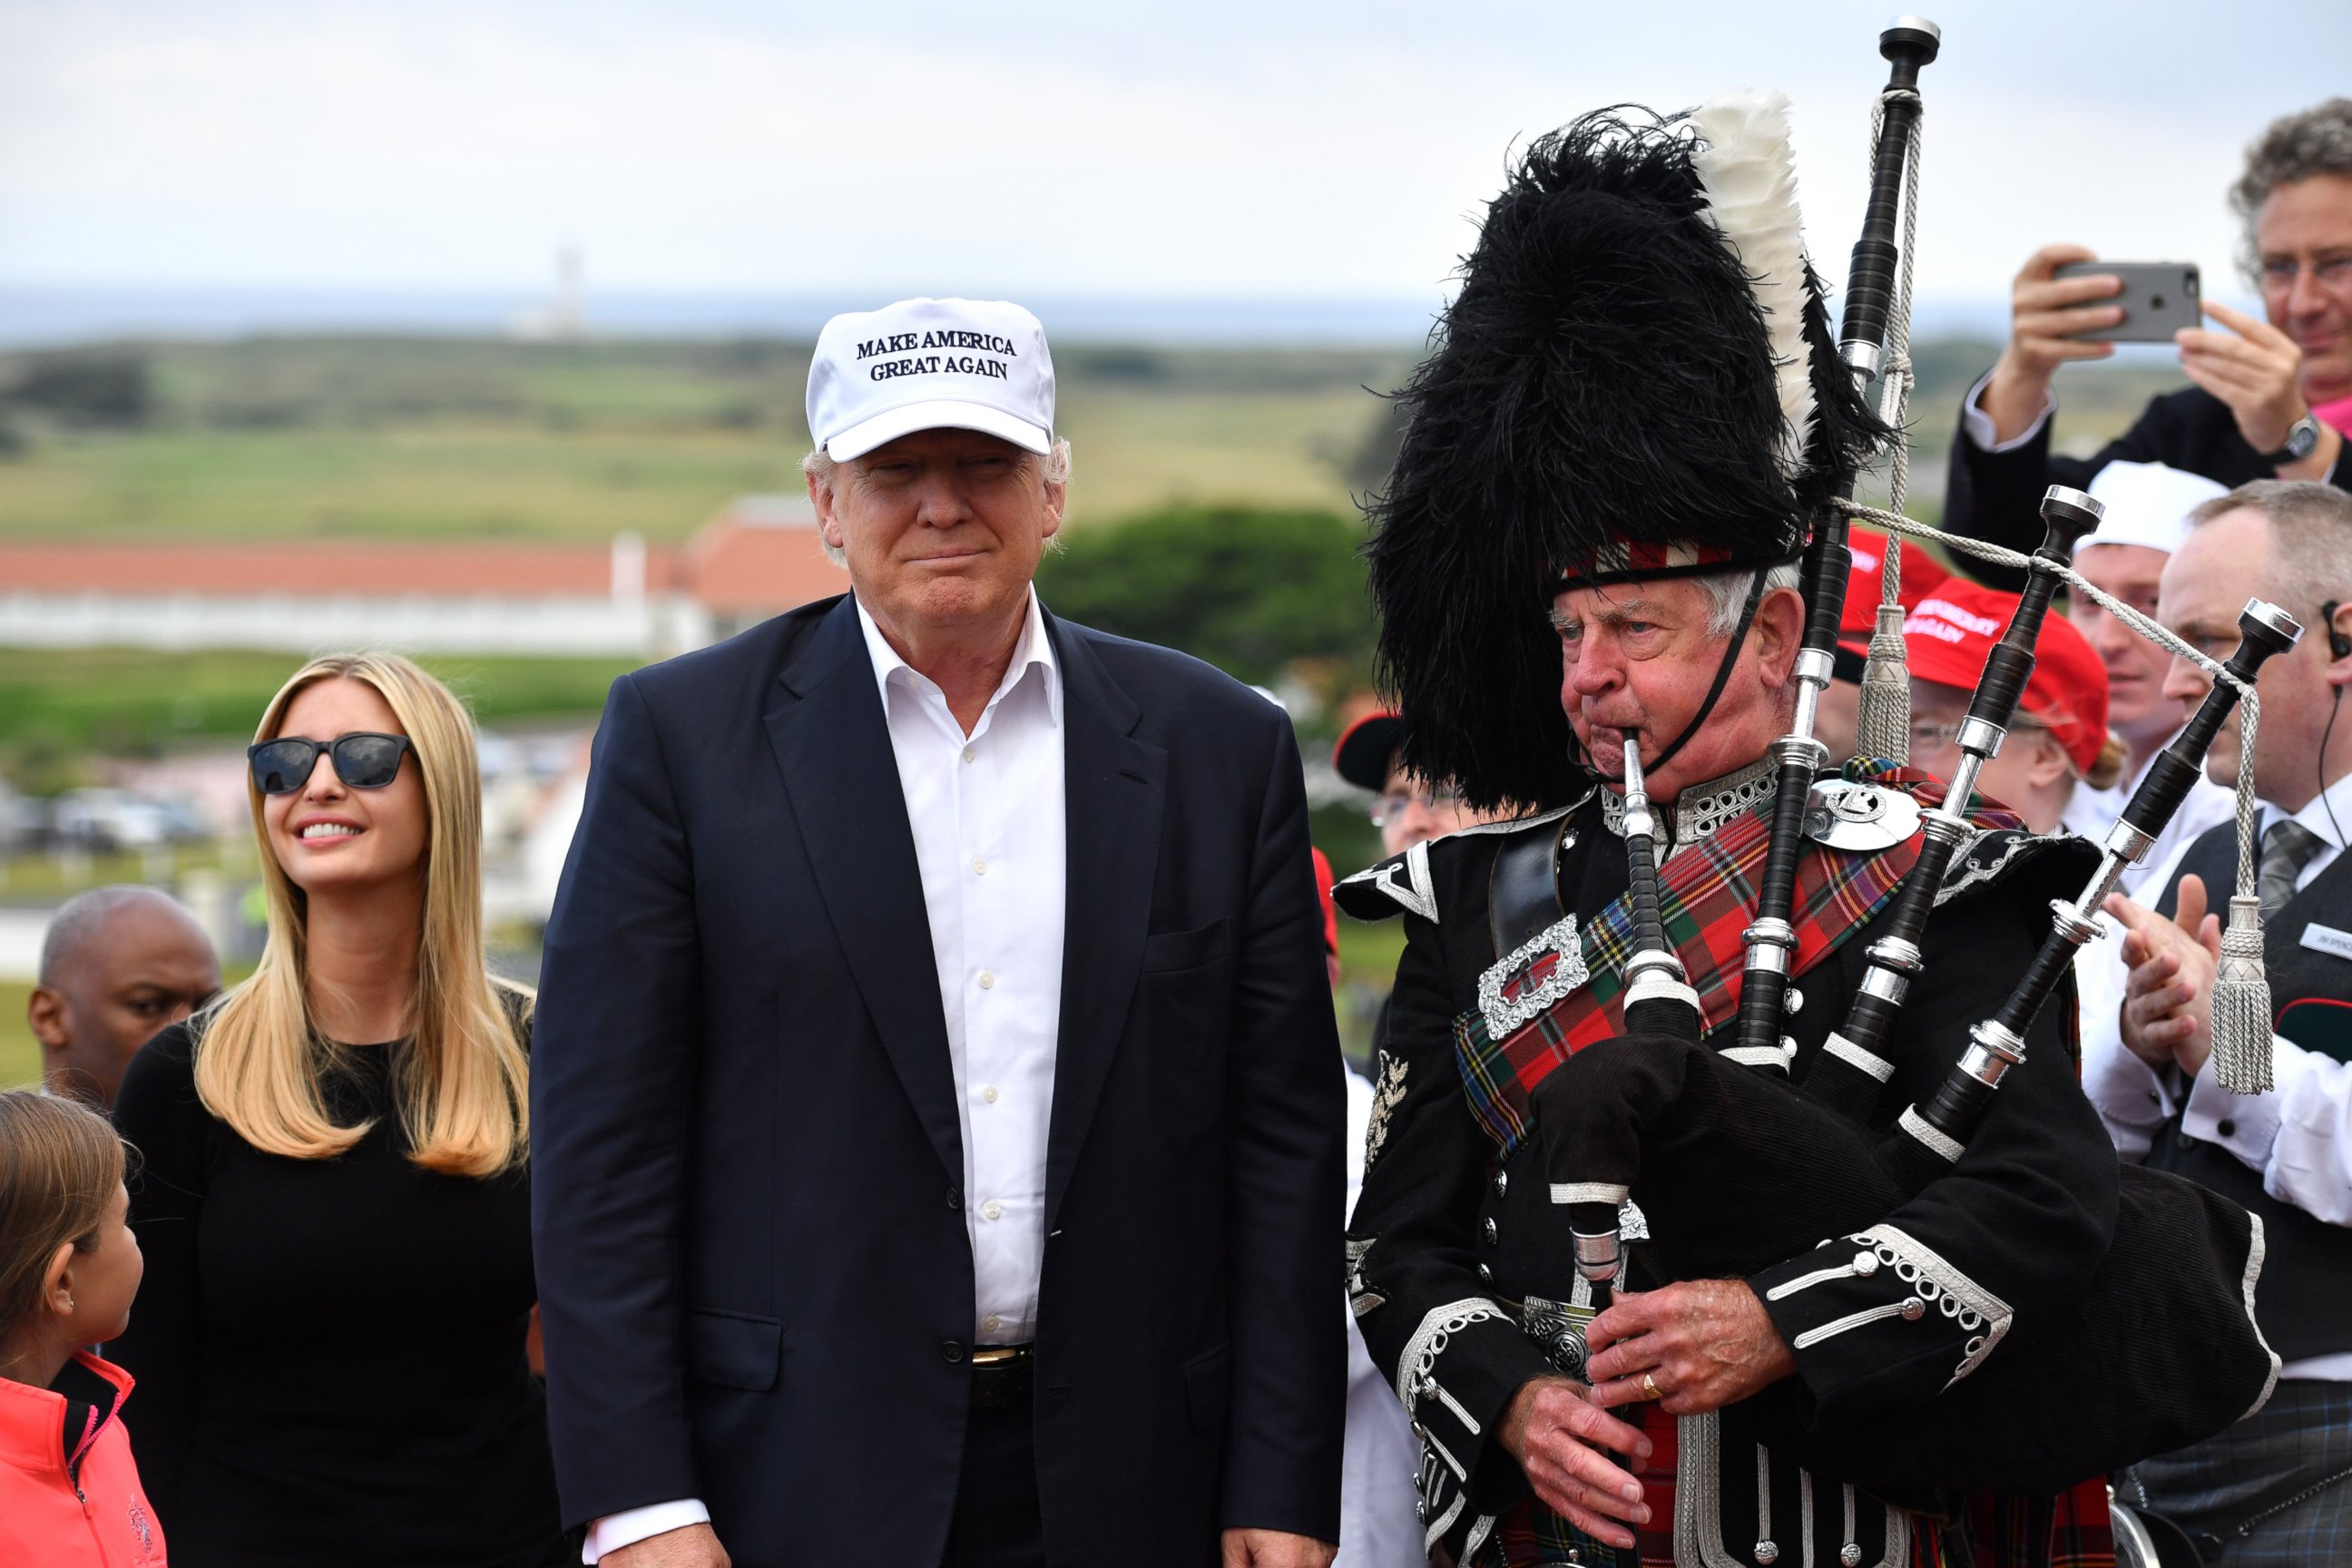 PHOTO: A bagpipe player wears traditional dress next to Donald Trump and his family as they arrive to his Trump Turnberry Resort, June 24, 2016, in Ayr, Scotland.